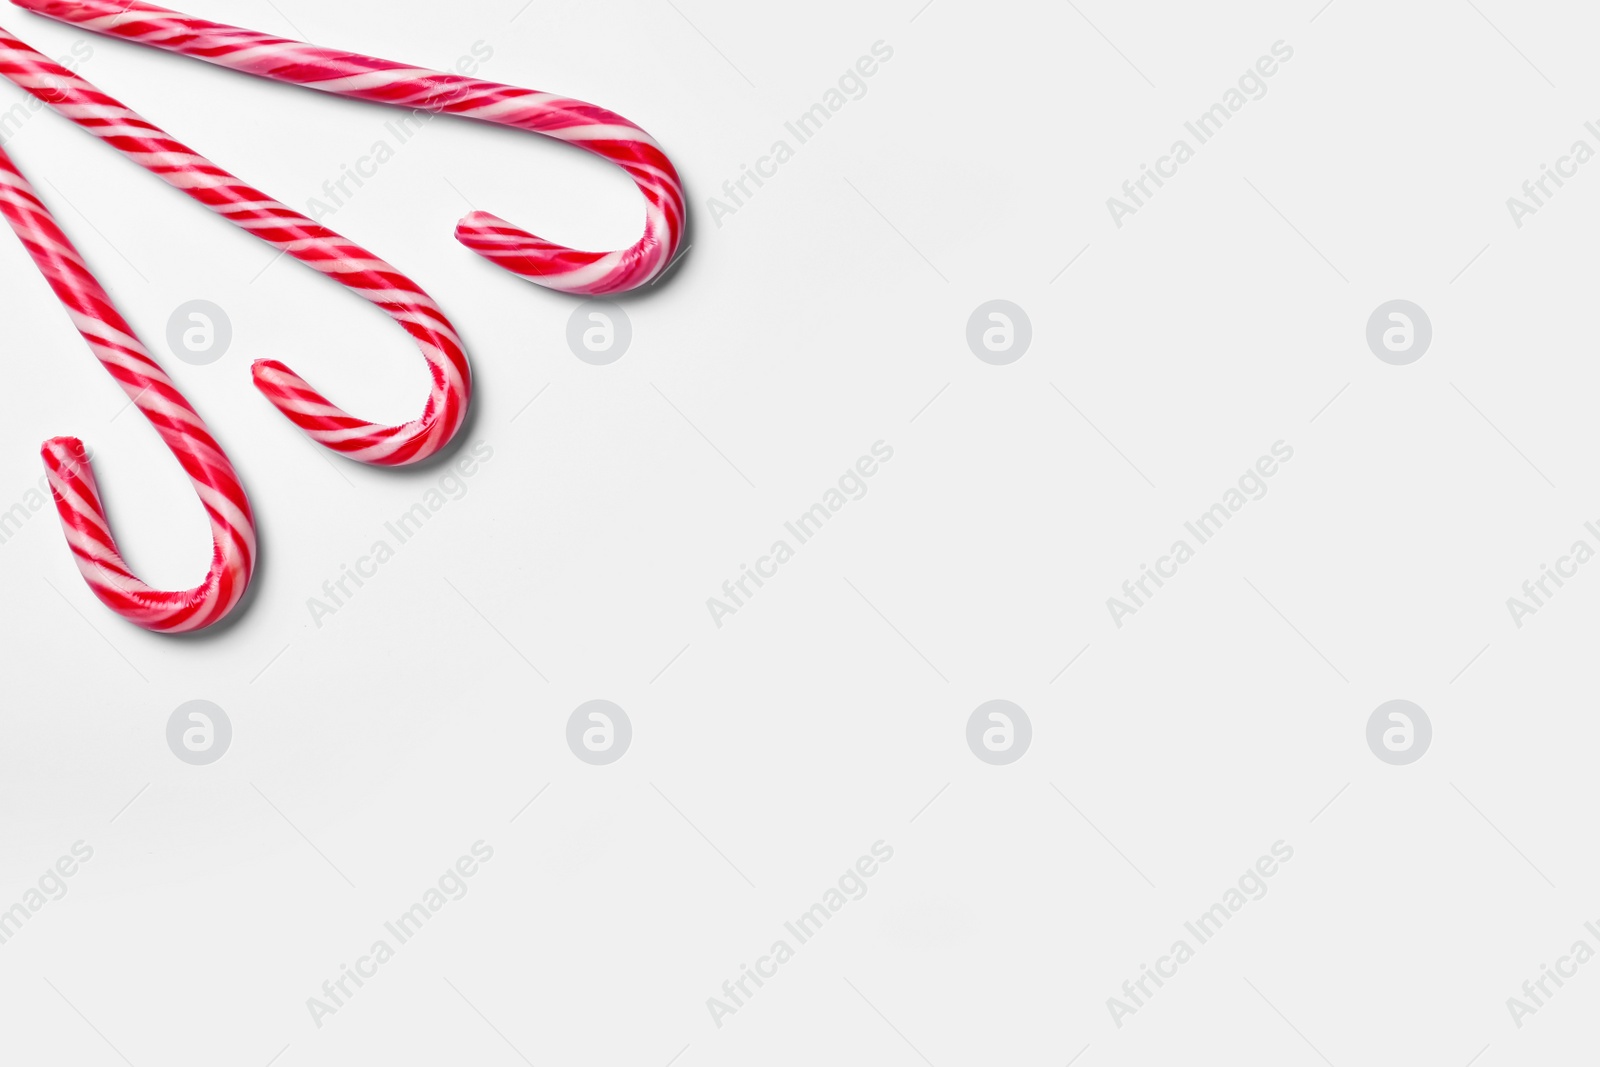 Photo of Sweet Christmas candy canes on white background, top view